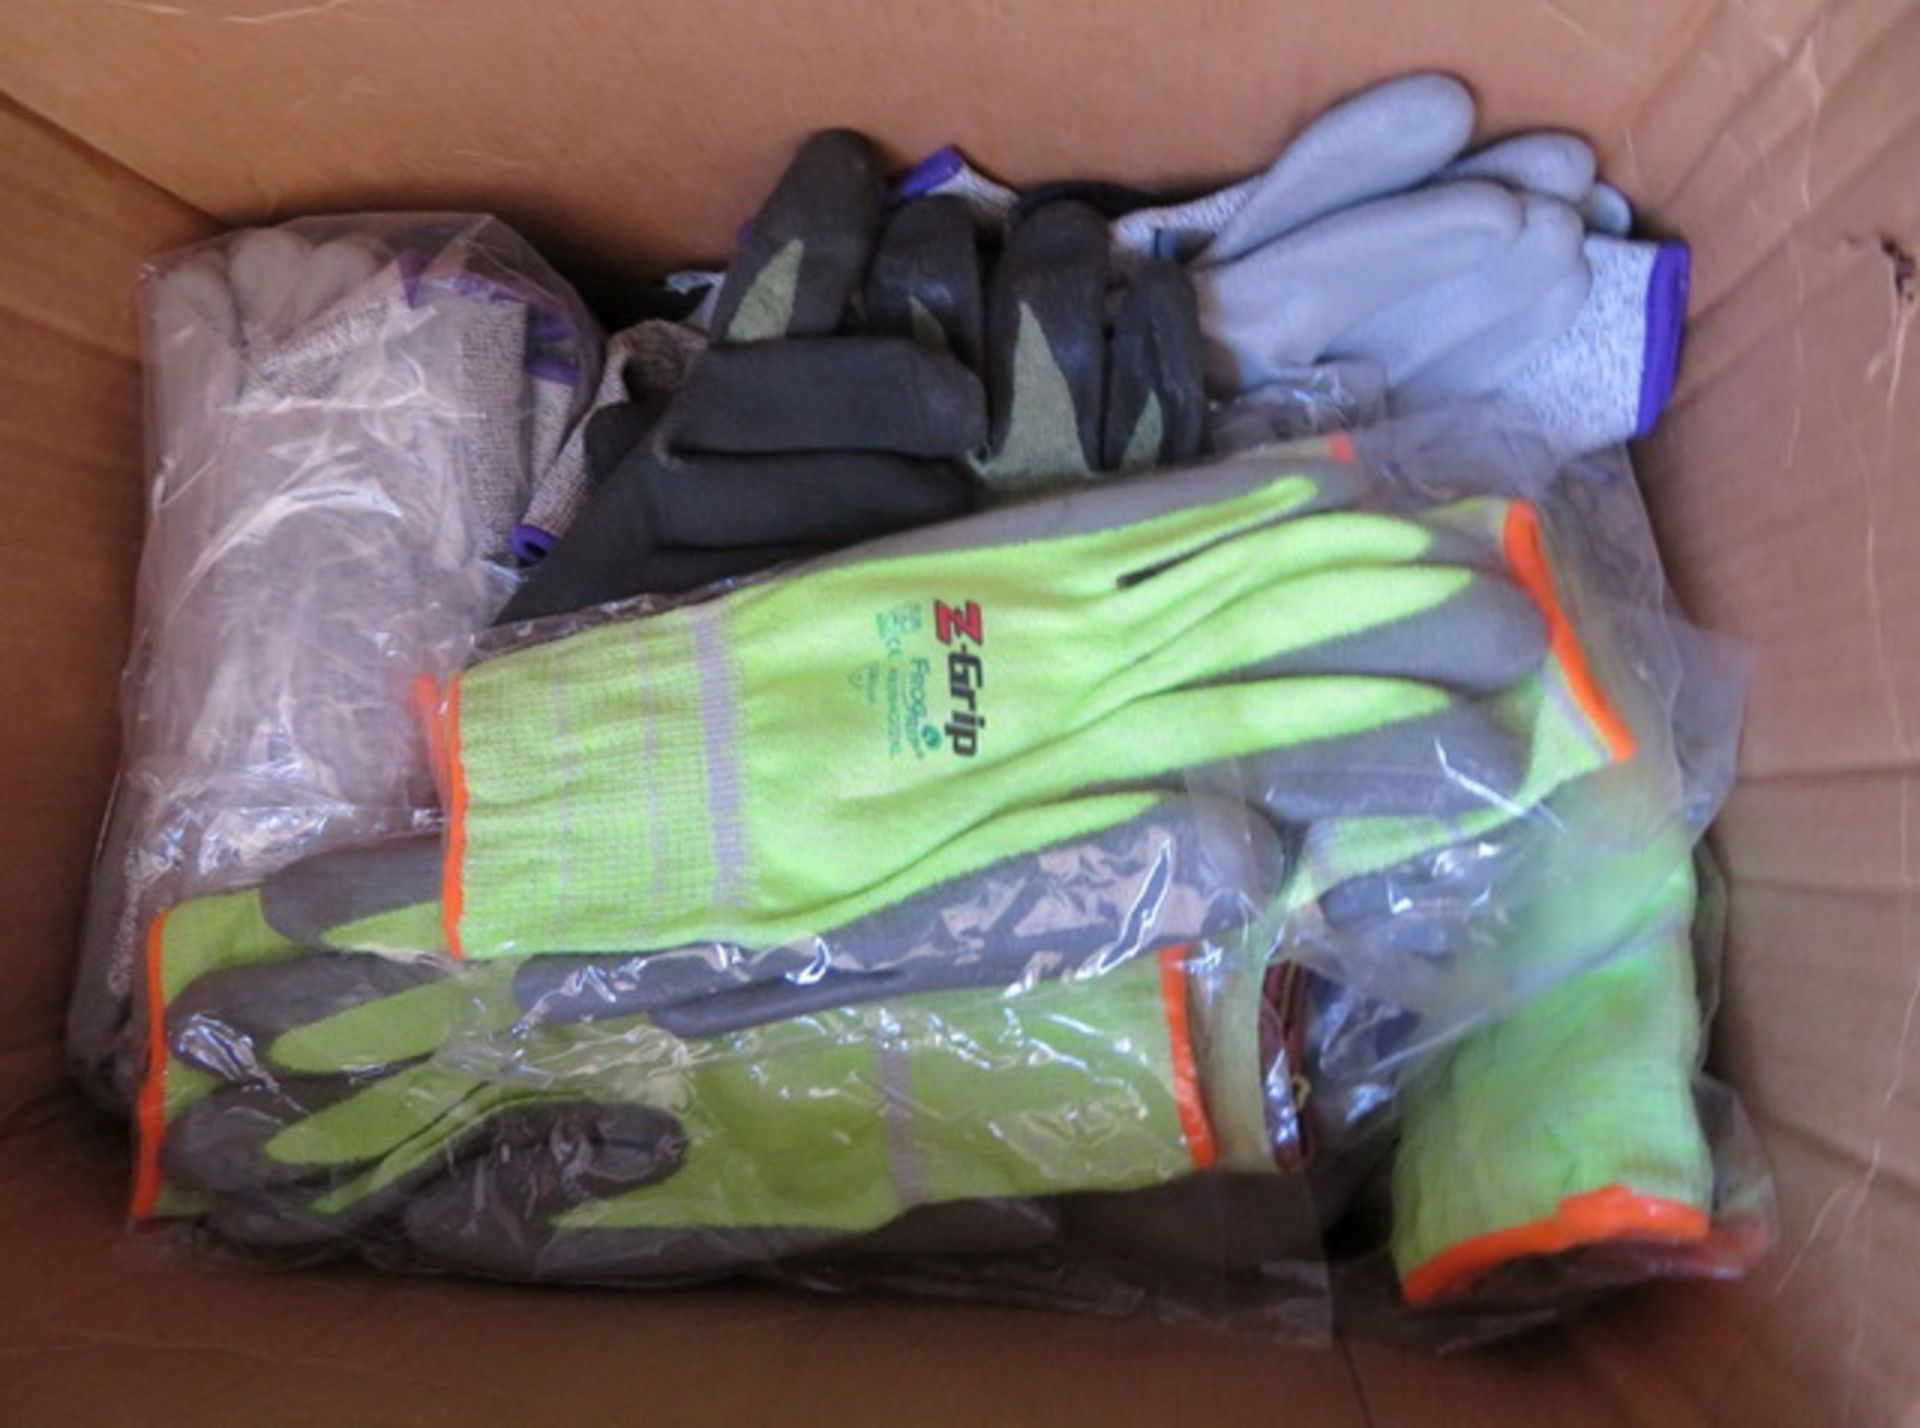 Contents of Shipping Container. To Include 1/2" PVDF Tubing, Safety Glasses, Safety Signs, - Image 2 of 51